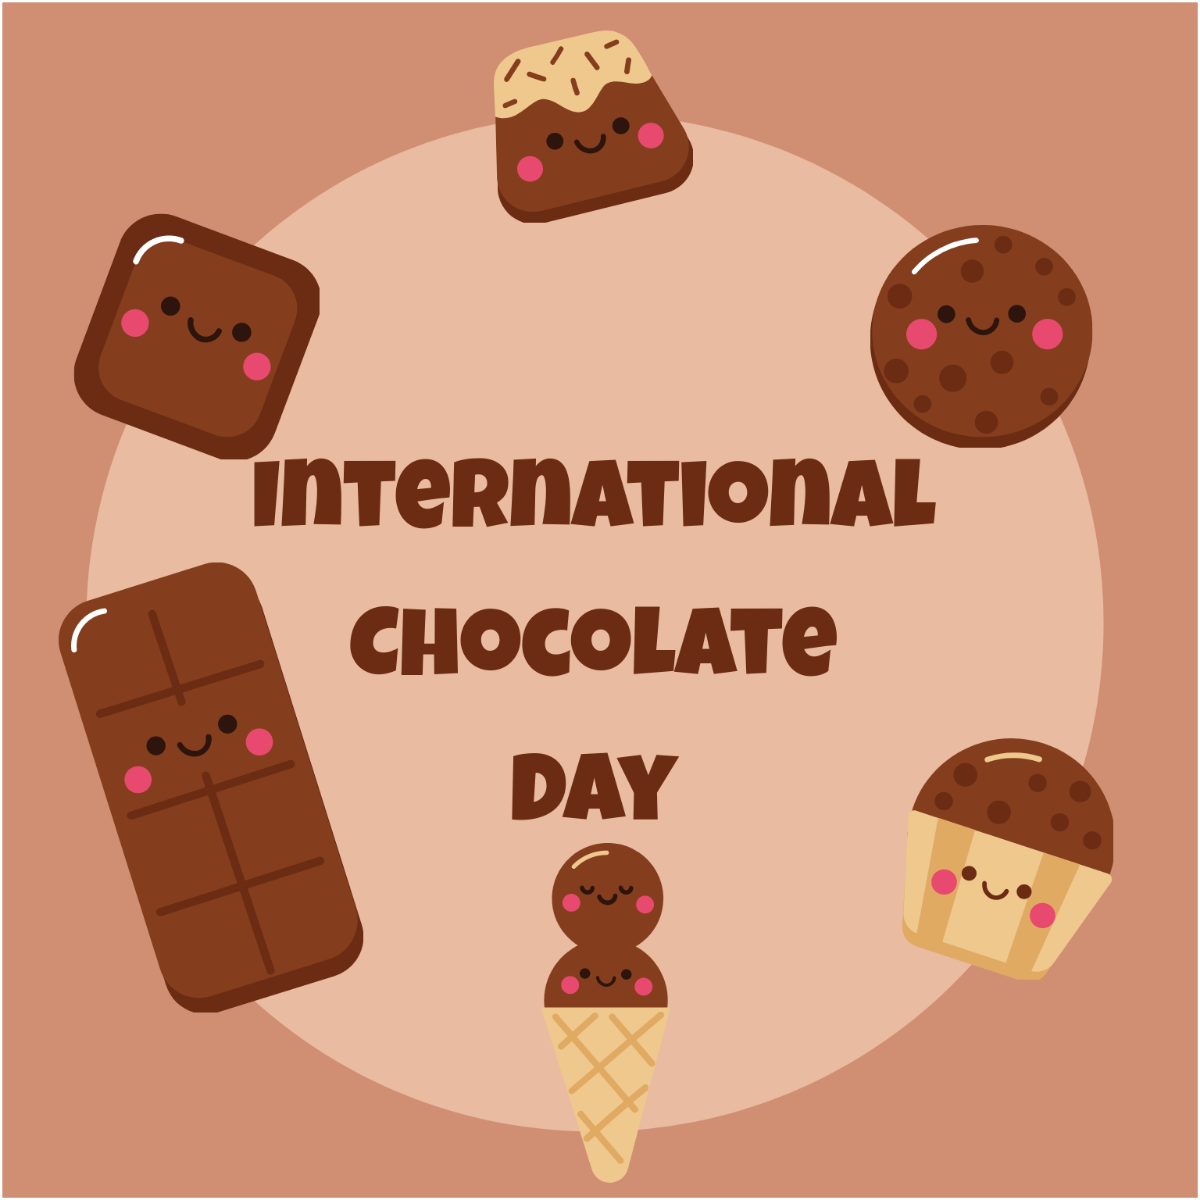 International Chocolate Day Drawing Background in PNG, EPS, JPG, SVG, PDF,  Illustrator, PSD - Download | Template.net